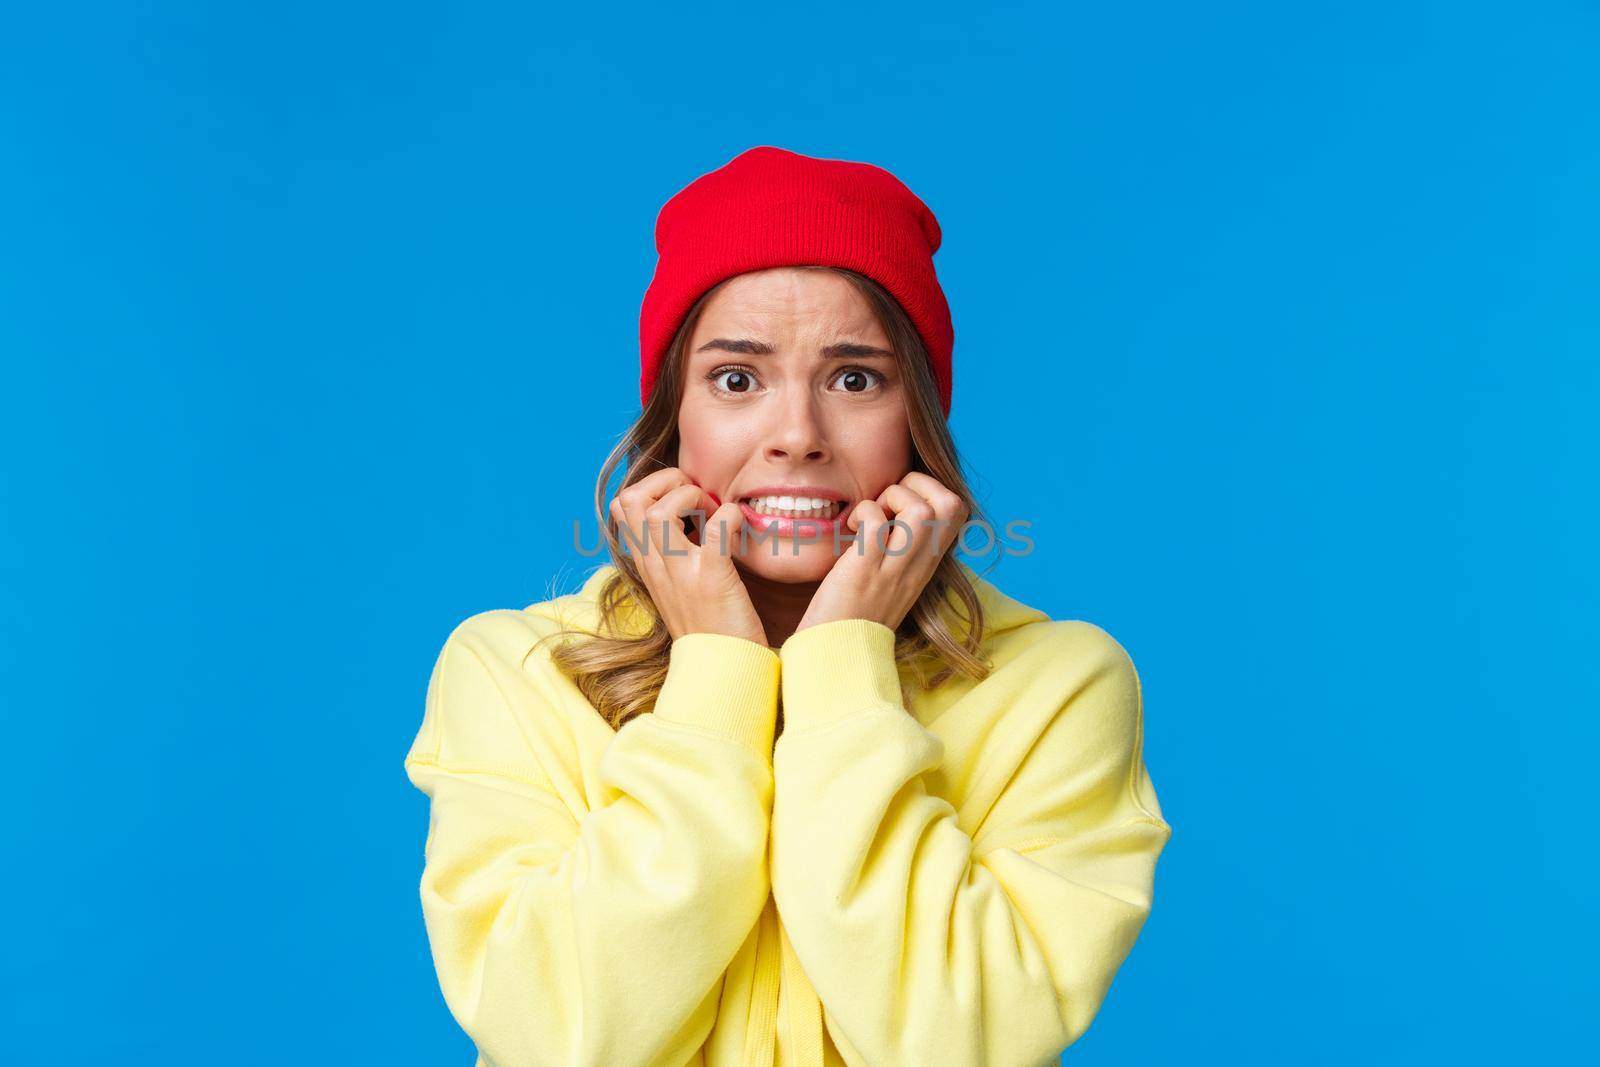 Close-up portrait of scared and insecure cute troubled caucasian girl in red beanie, biting fingernails and frowning concerned, look afraid and worried over some trouble, standing blue background.